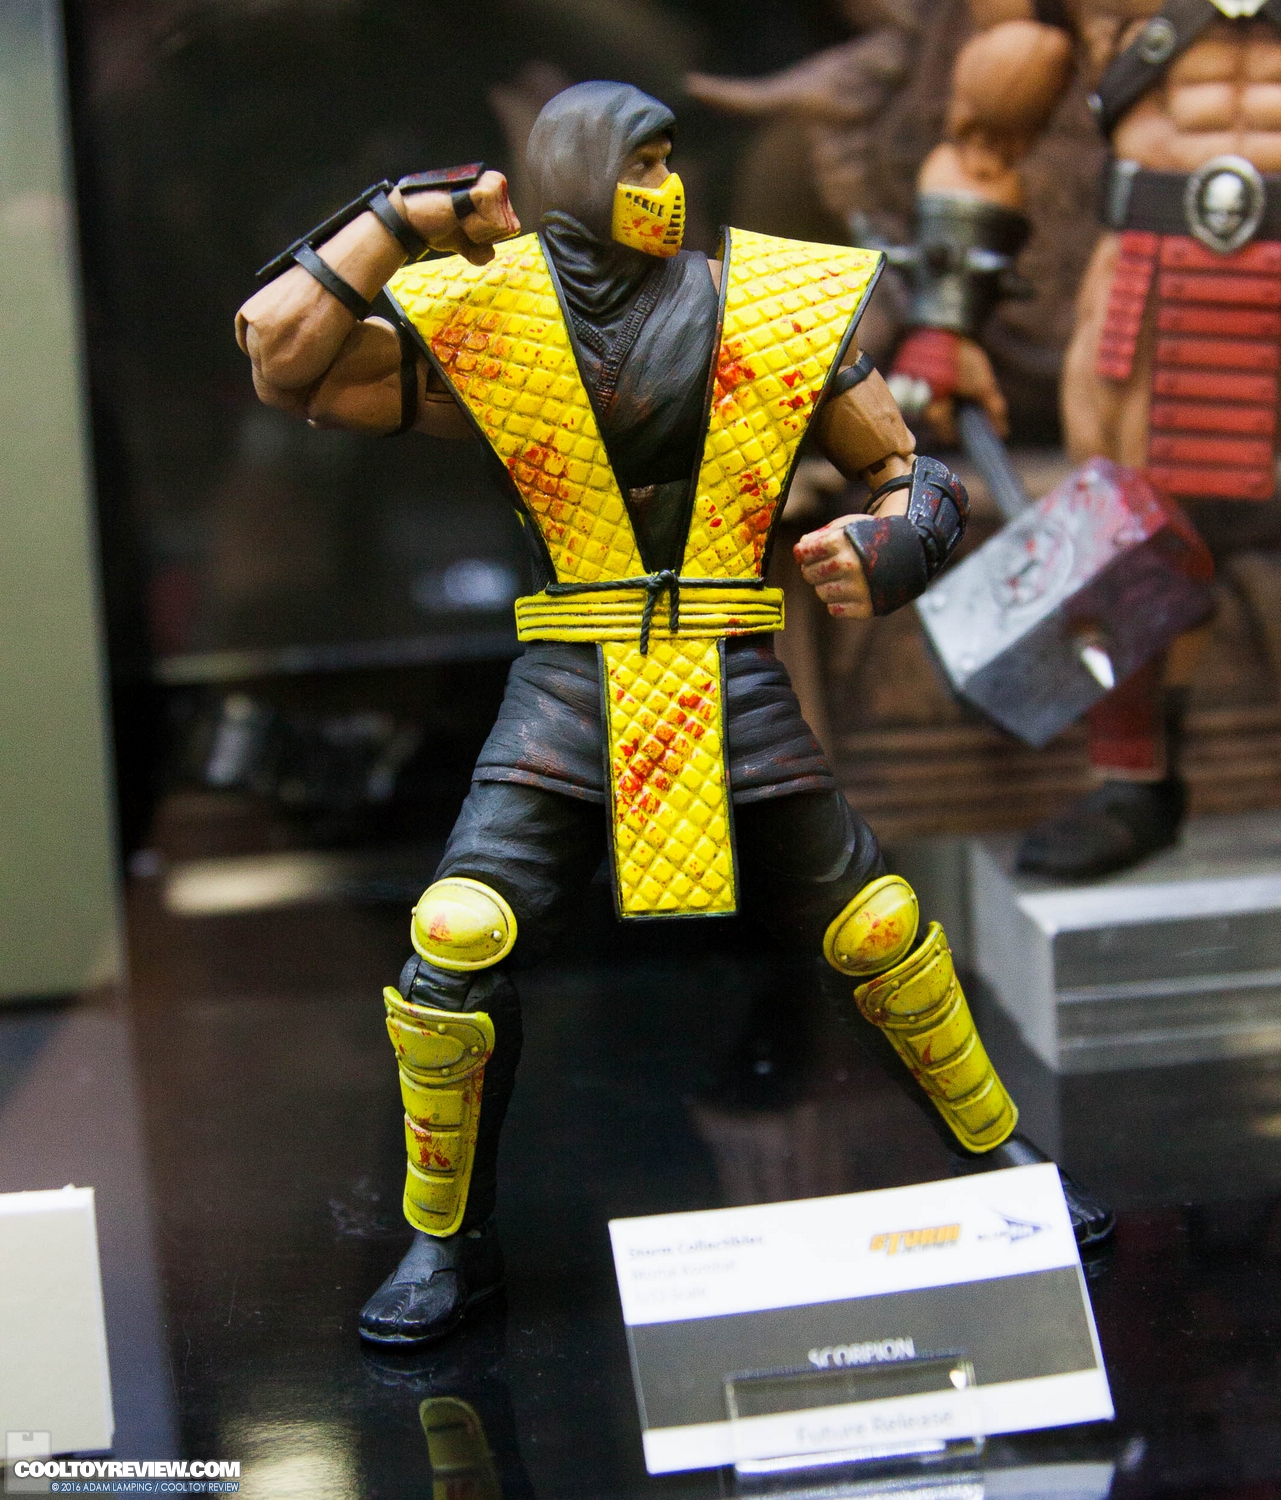 san-diego-comic-con-storm-collectibles-booth-026.jpg